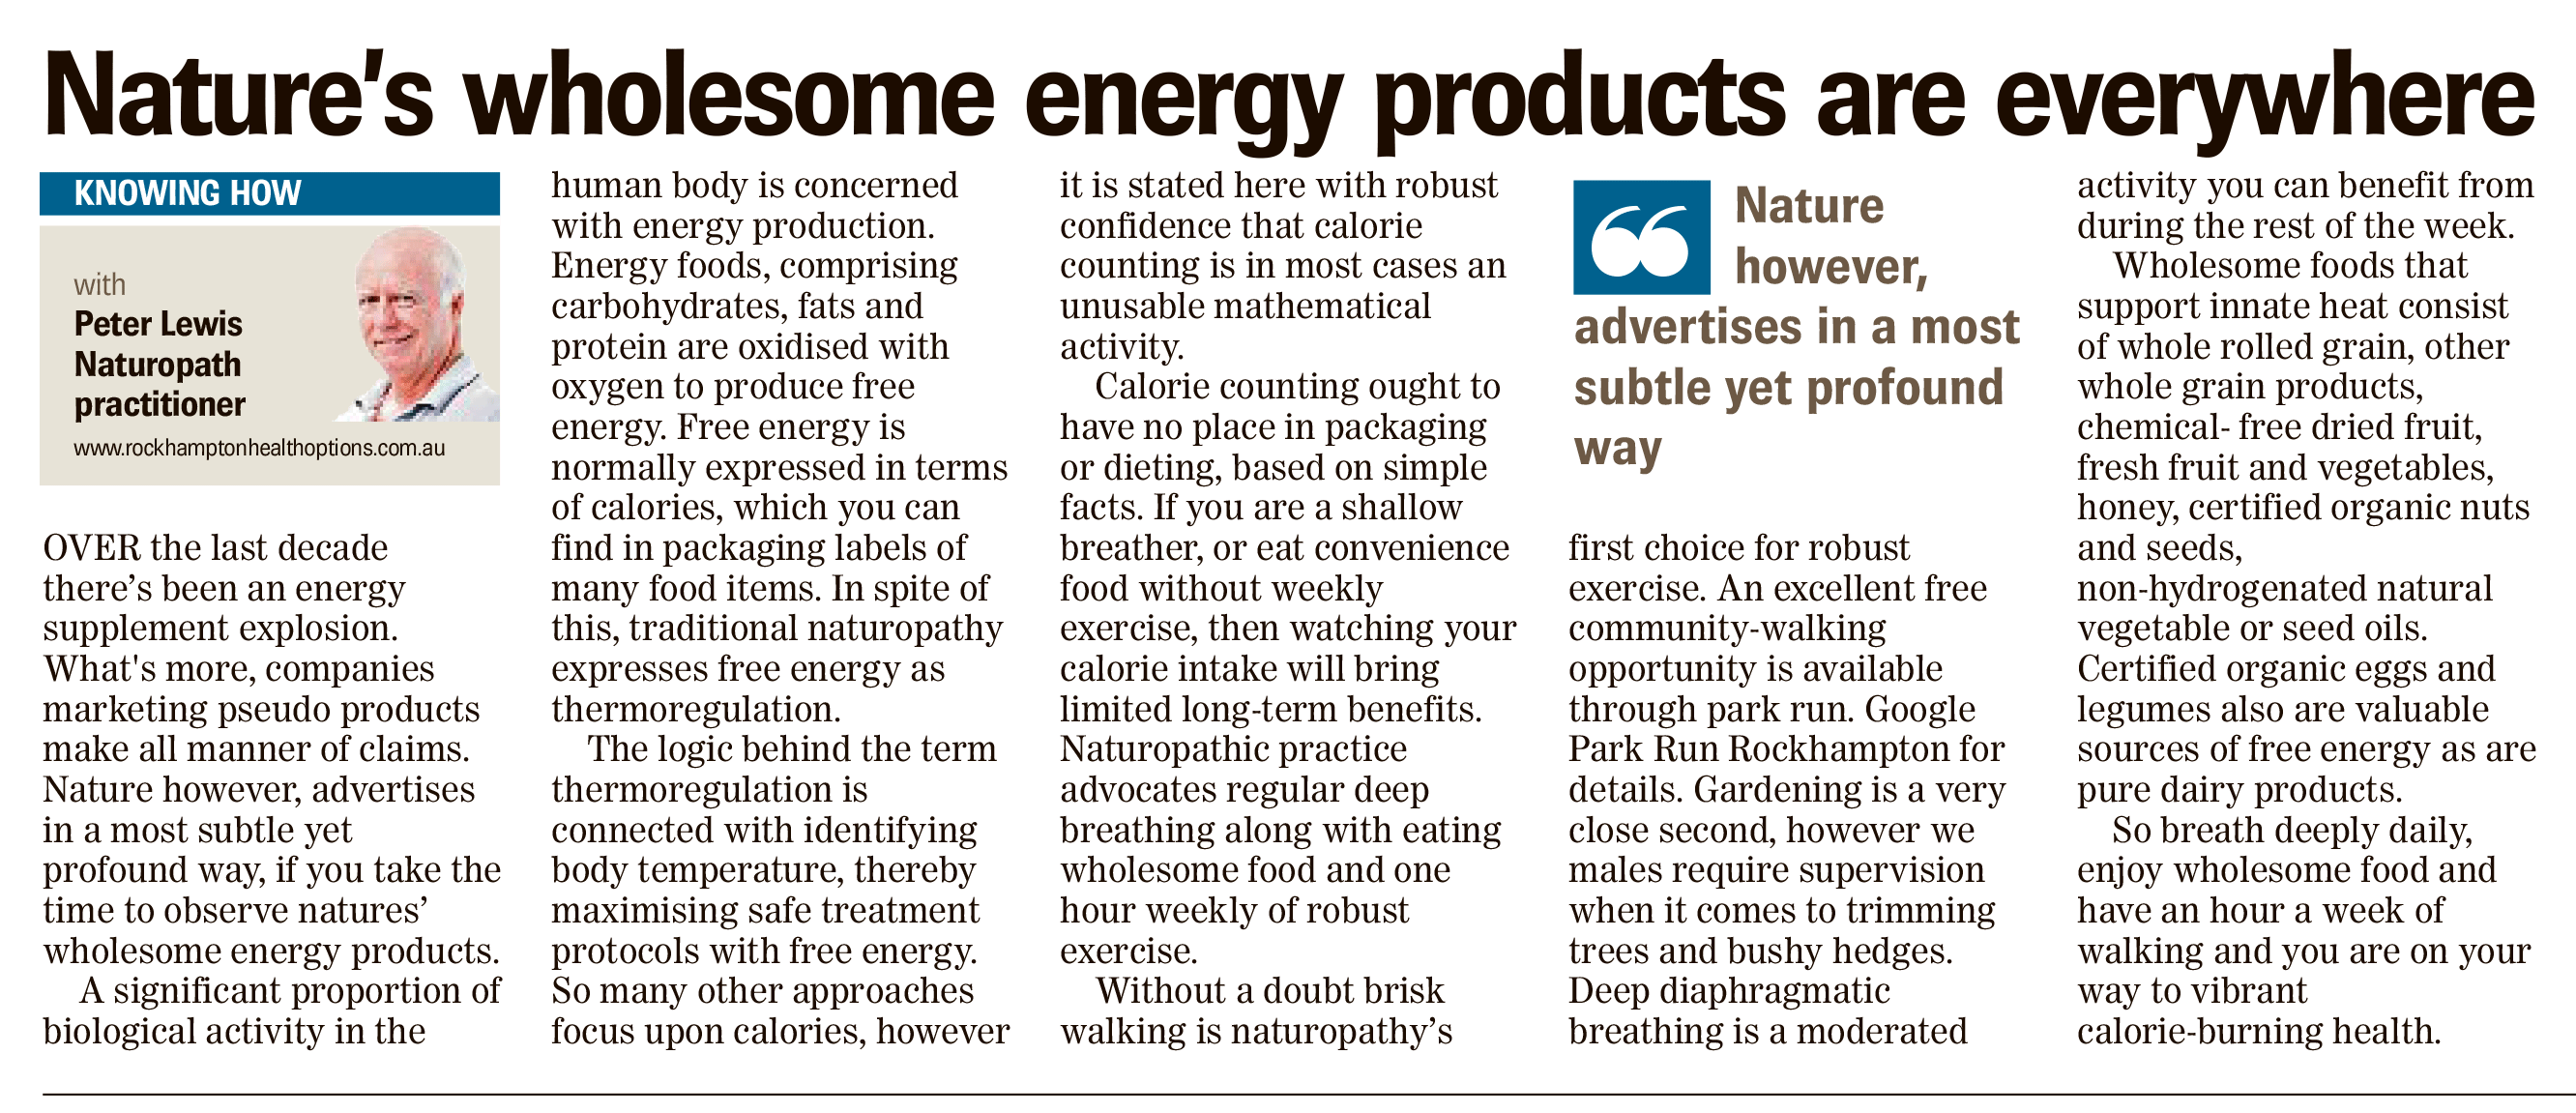 Article on Natures wholesome energy products are everywhere